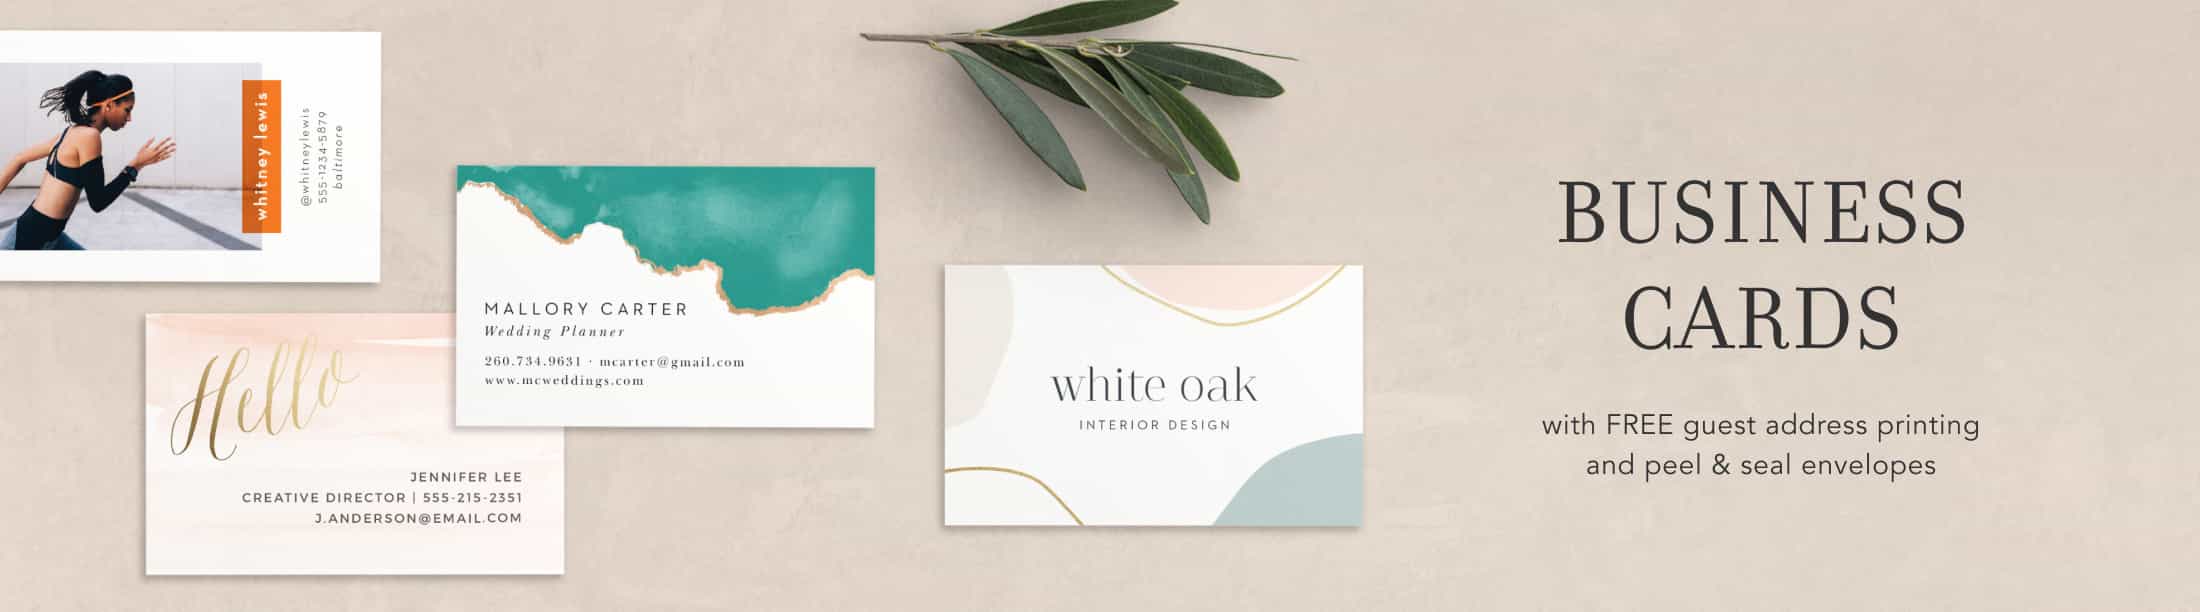 DIY BUSINESS CARD Print Yourself Glam Business Card Beauty 